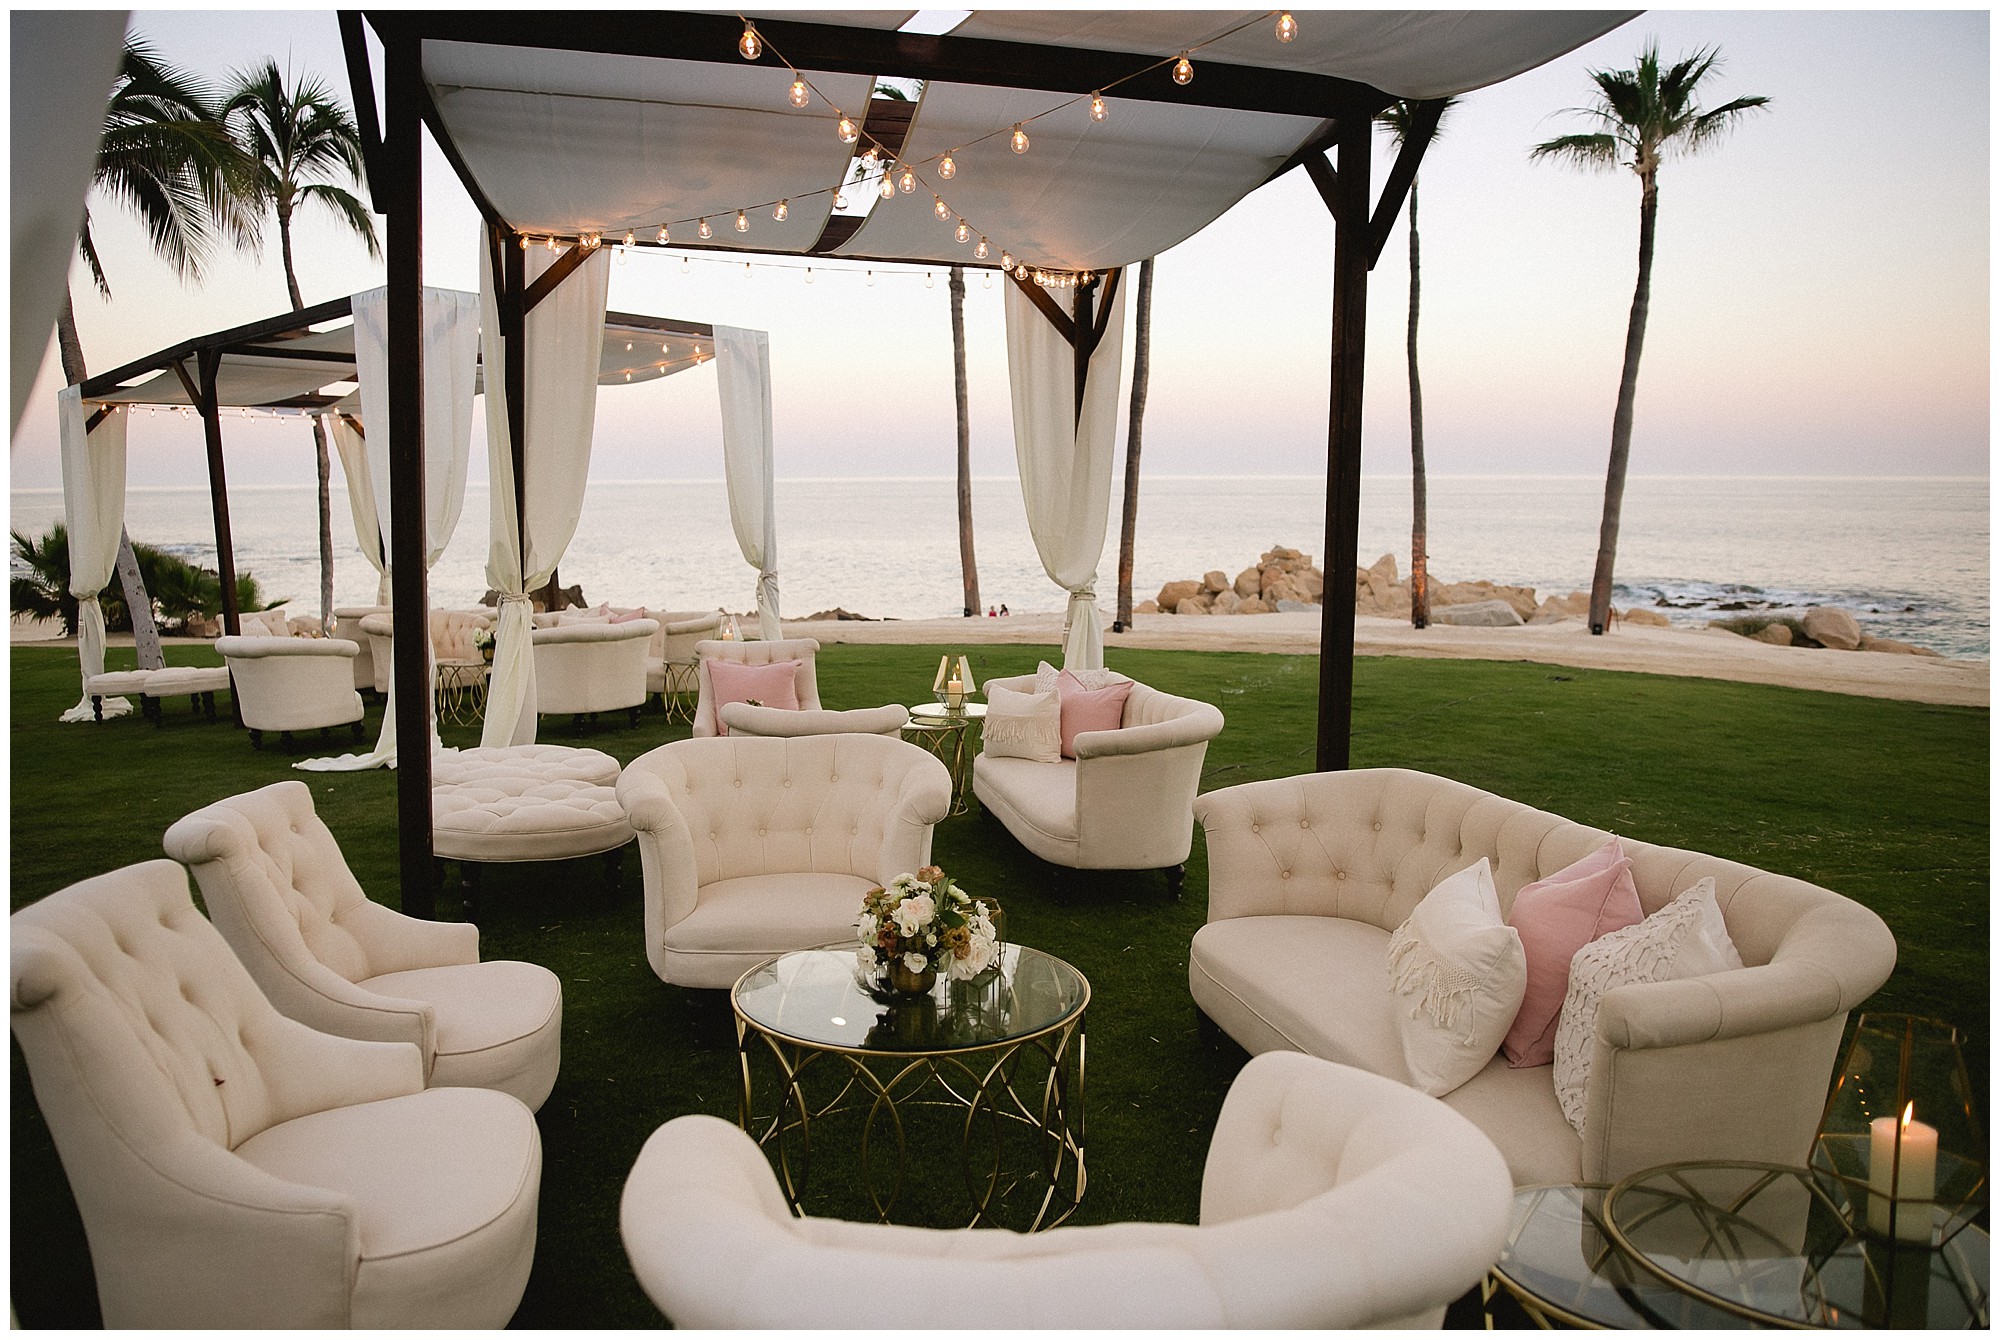 breath-taking lounging area at a One&Only Palmilla wedding